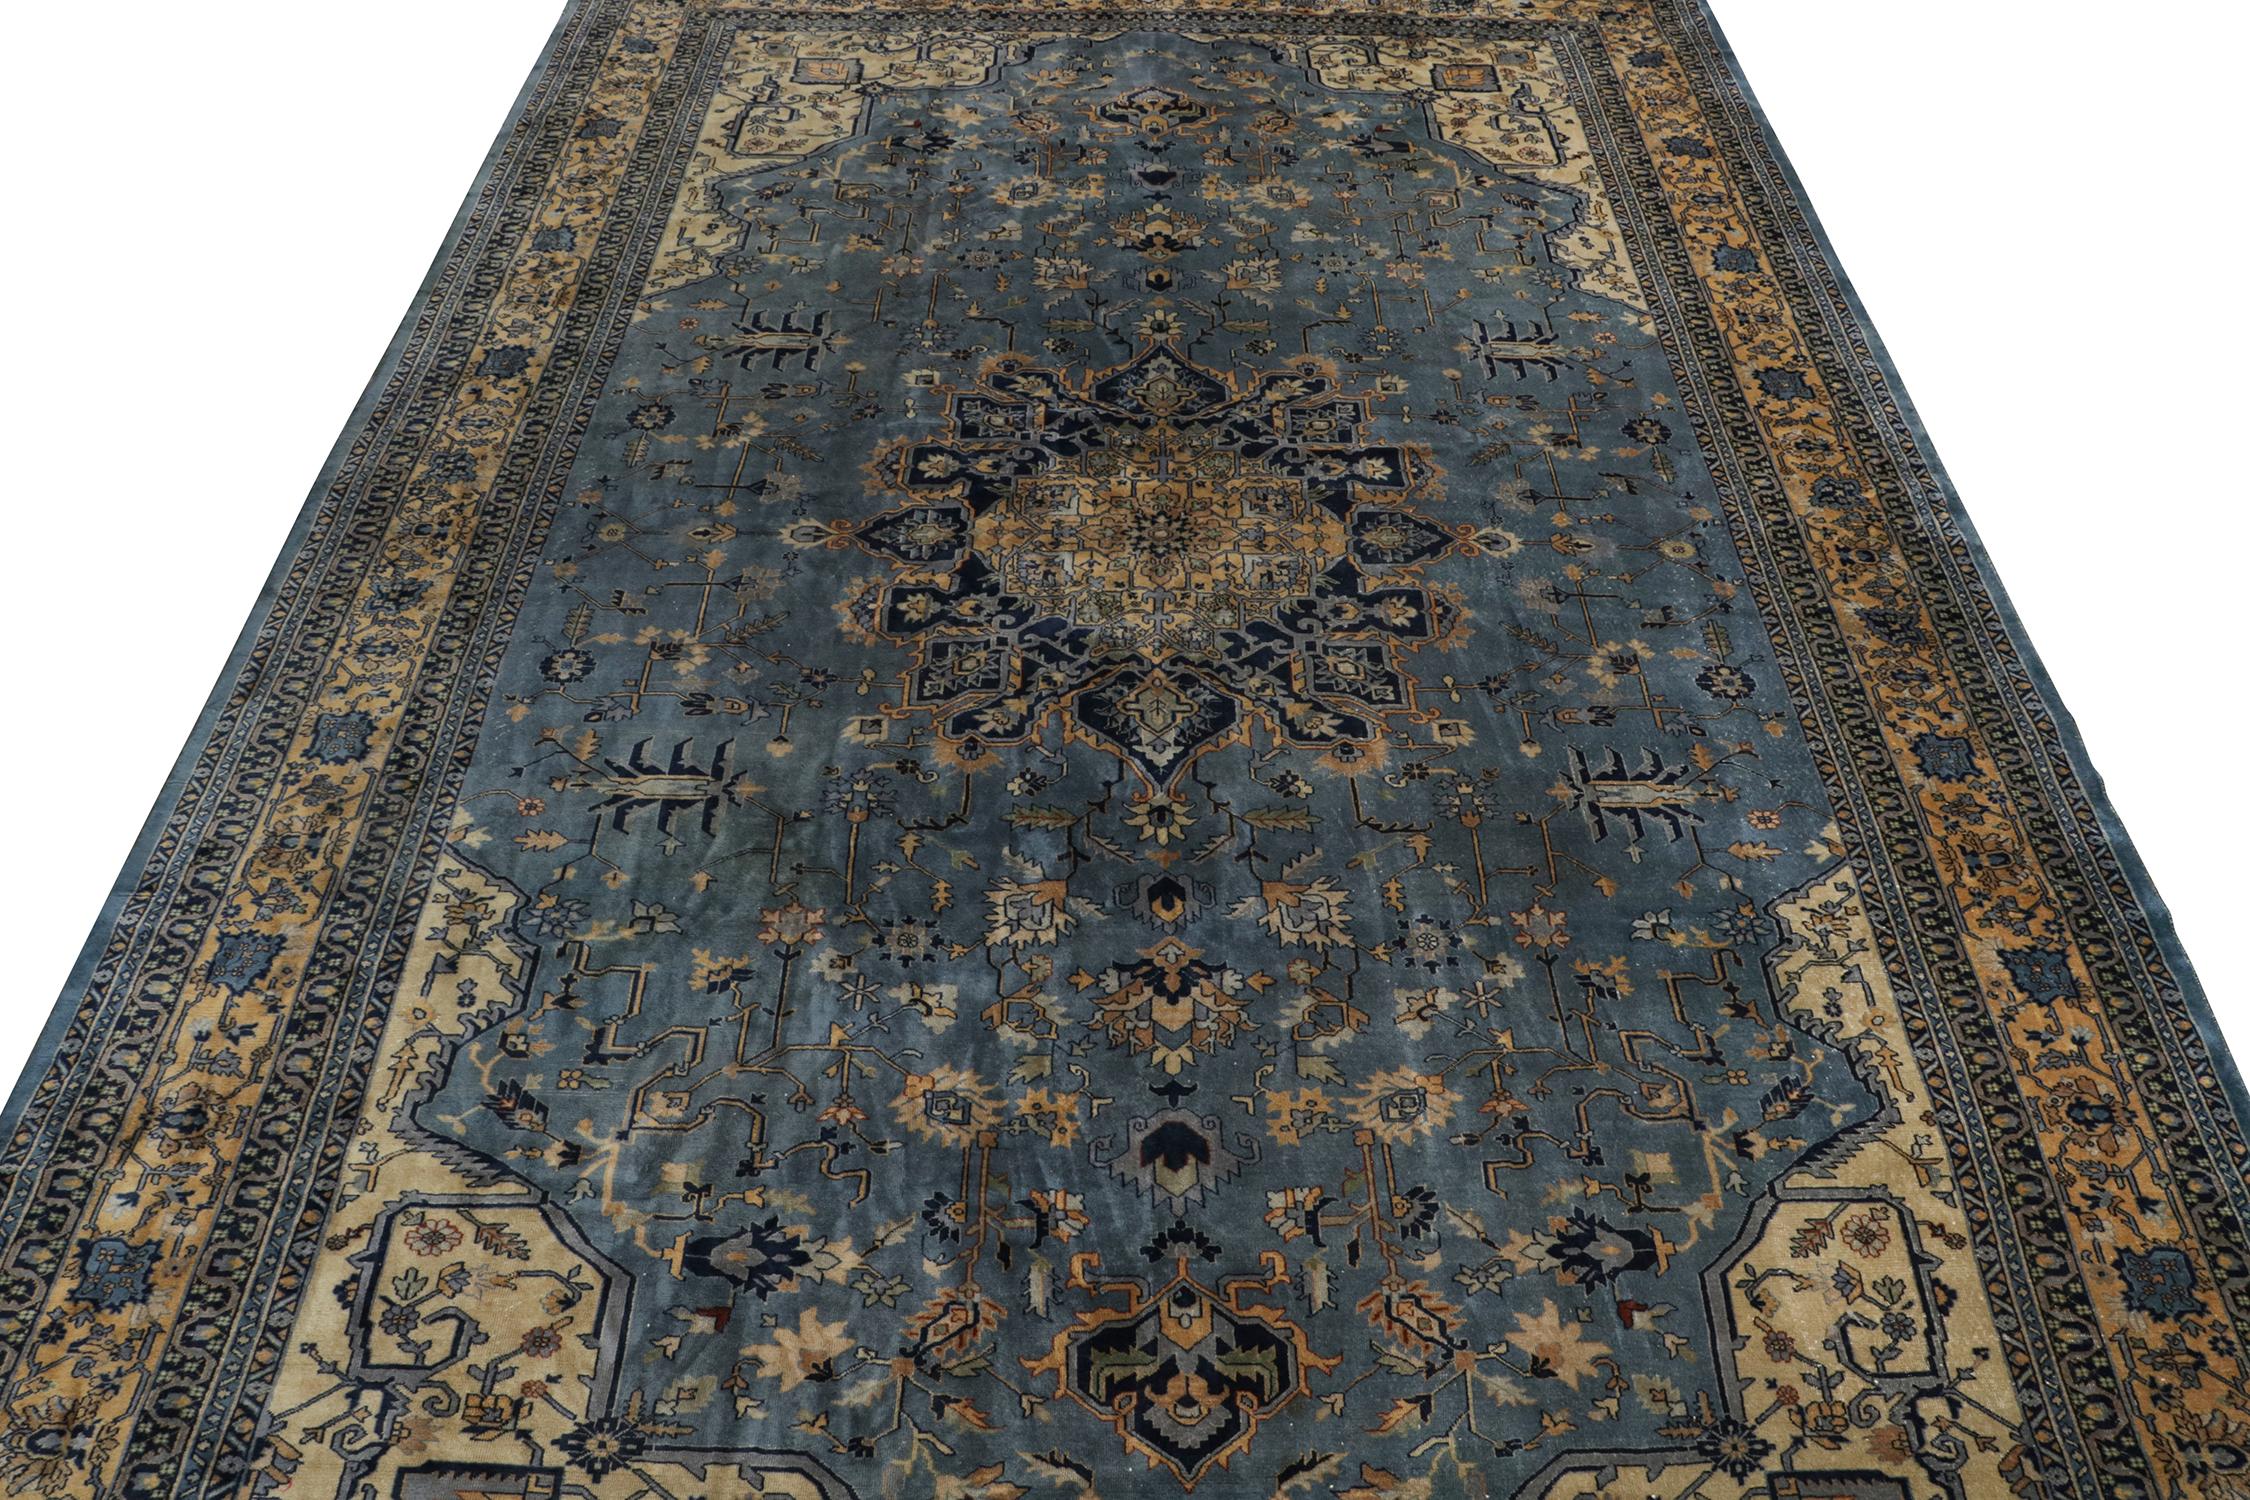 An antique 14x22 Indochinese Samarkand rug, hand-knotted in wool circa 1880-1890.

Further On the Design:

This antique piece is a royal selection that enjoys patterns in incredibly rare blue and gold deliciously punctuated by brown in its arresting